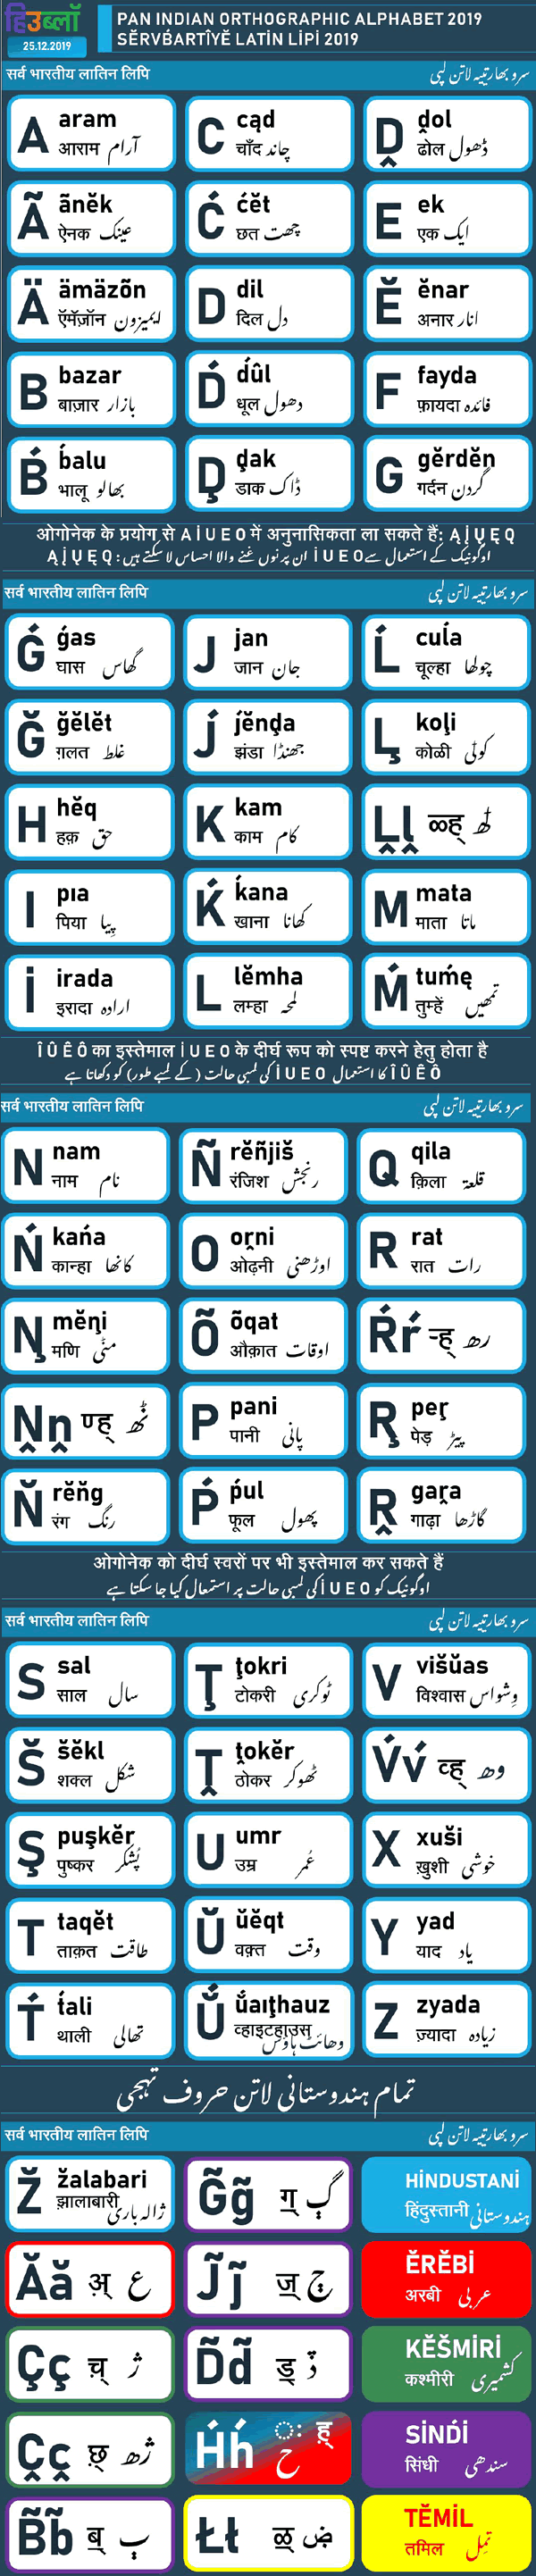 Pan-Indian Orthographic Alphabet - basic letters